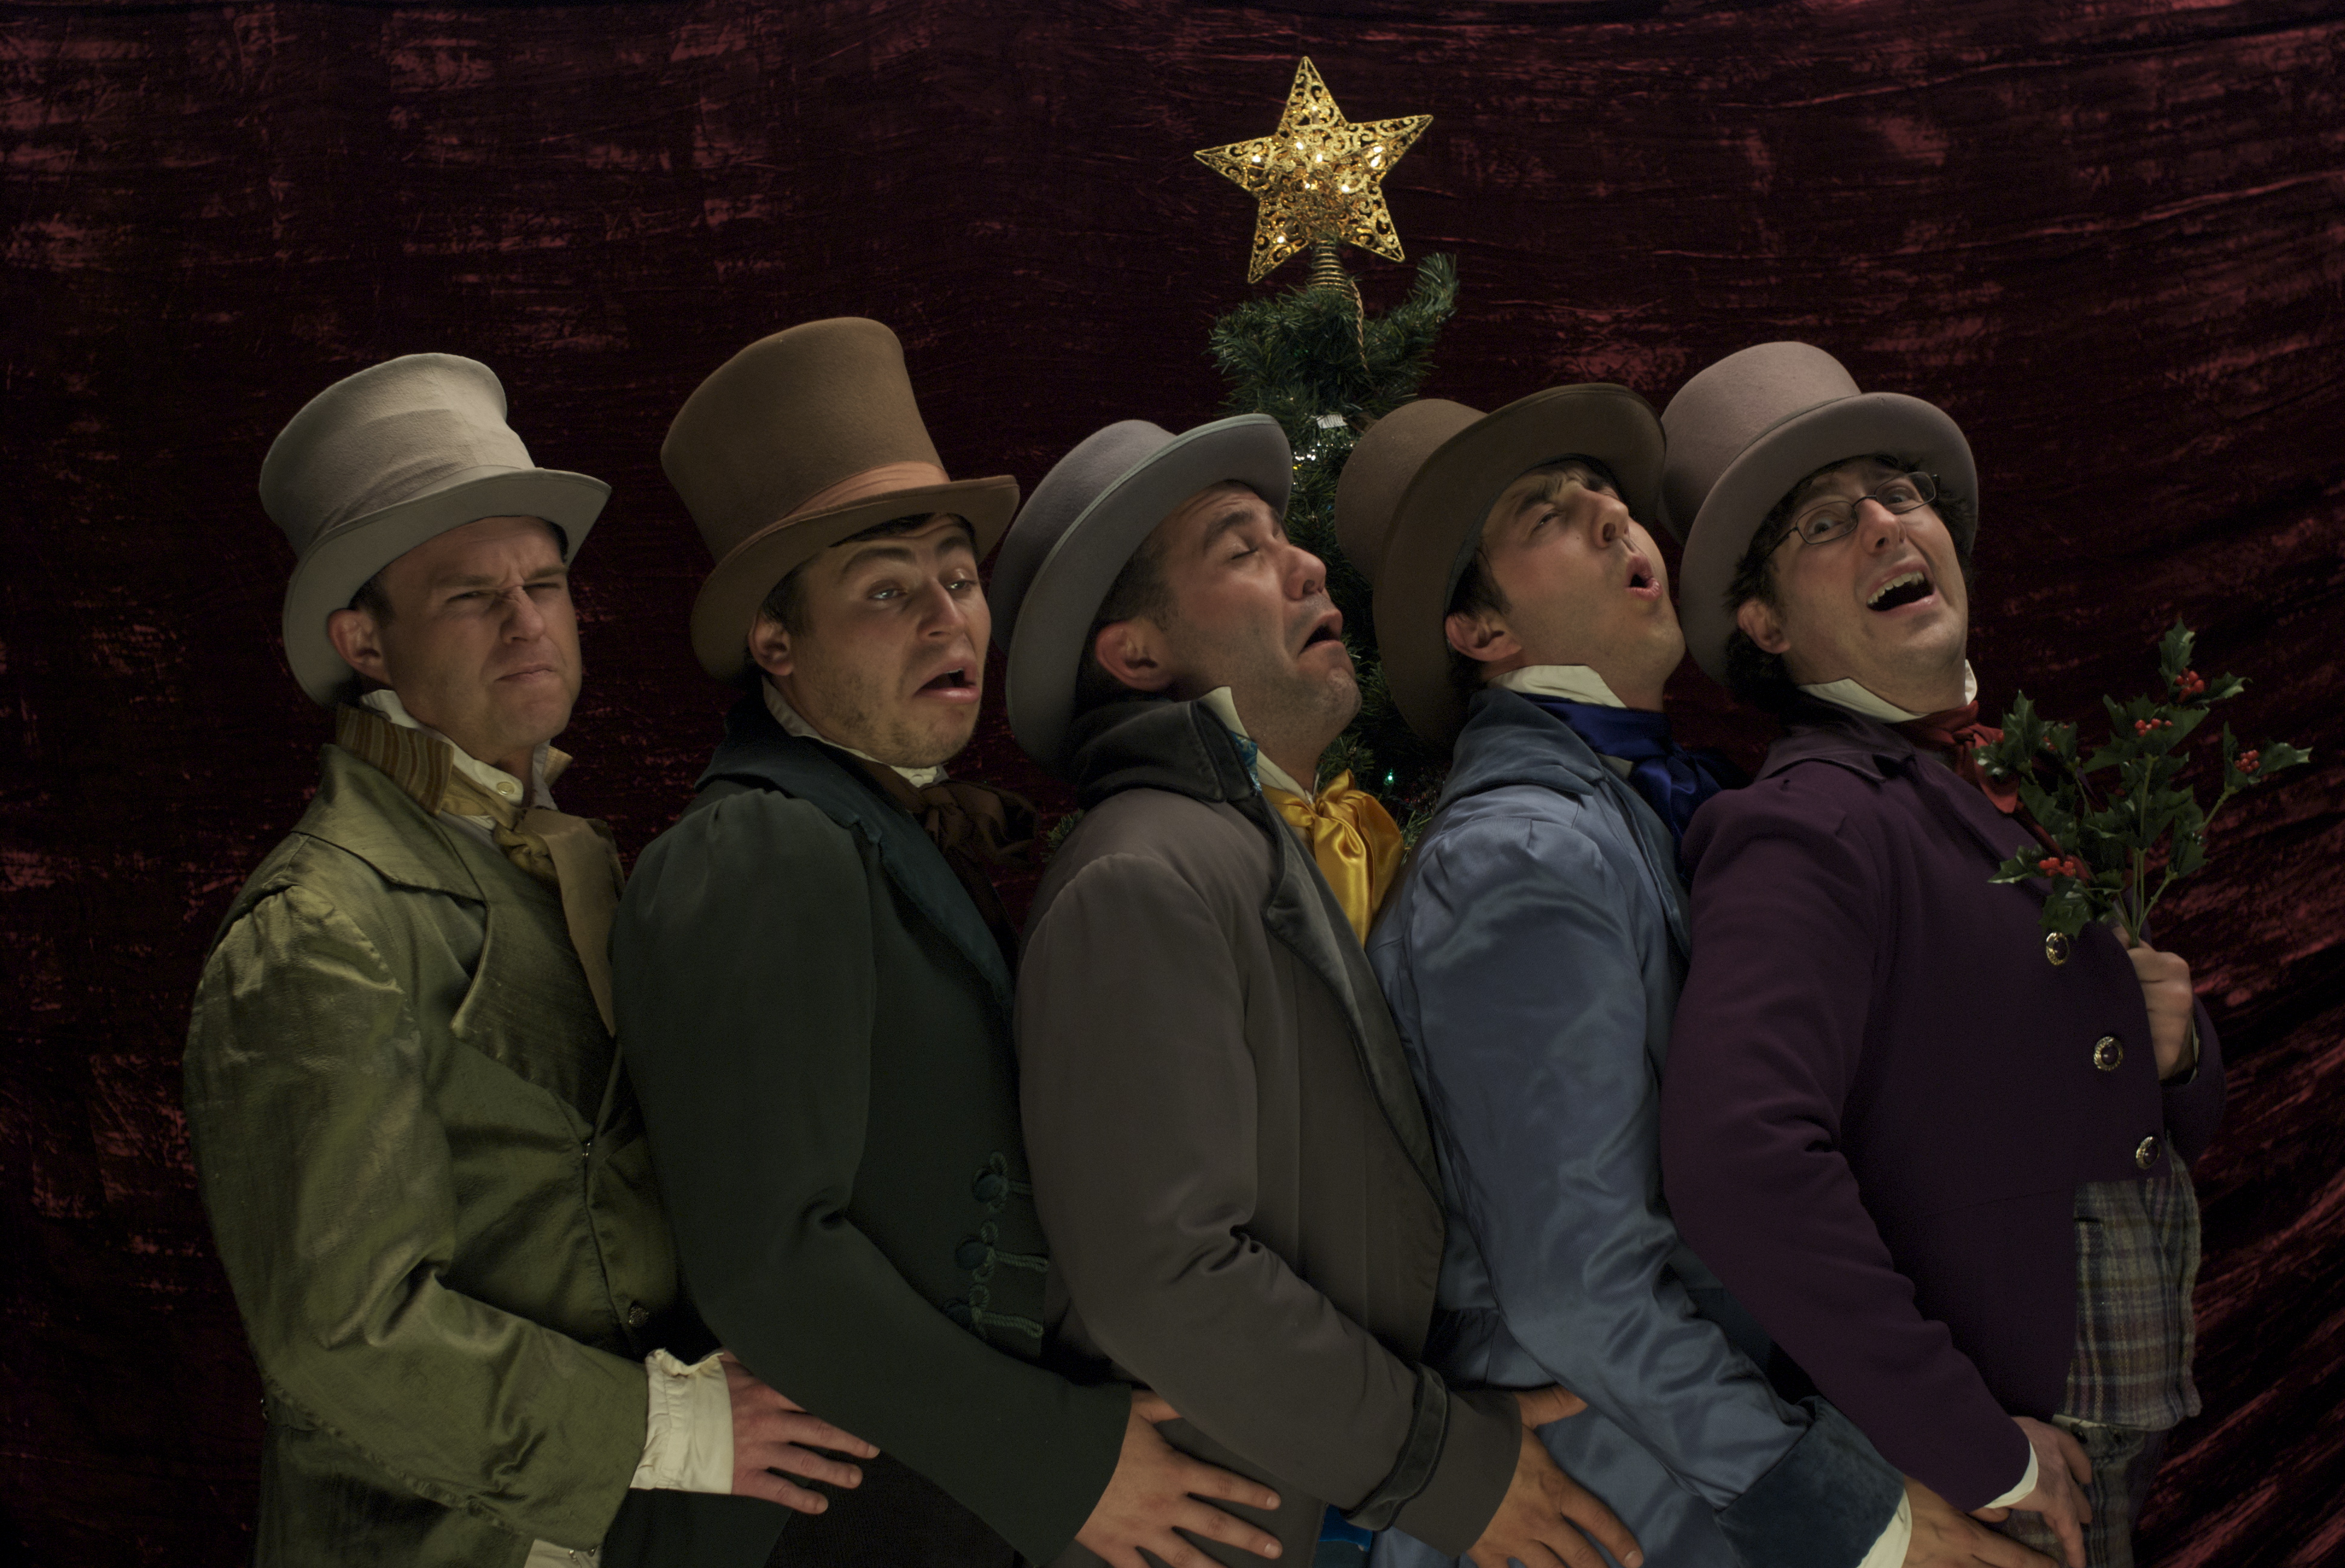 Andy Goldenberg as a Caroler in THE CAROLERS with Jimmy Guidish, Cameron Fife, Tommy O' Rourke, and Mark Gagliardi